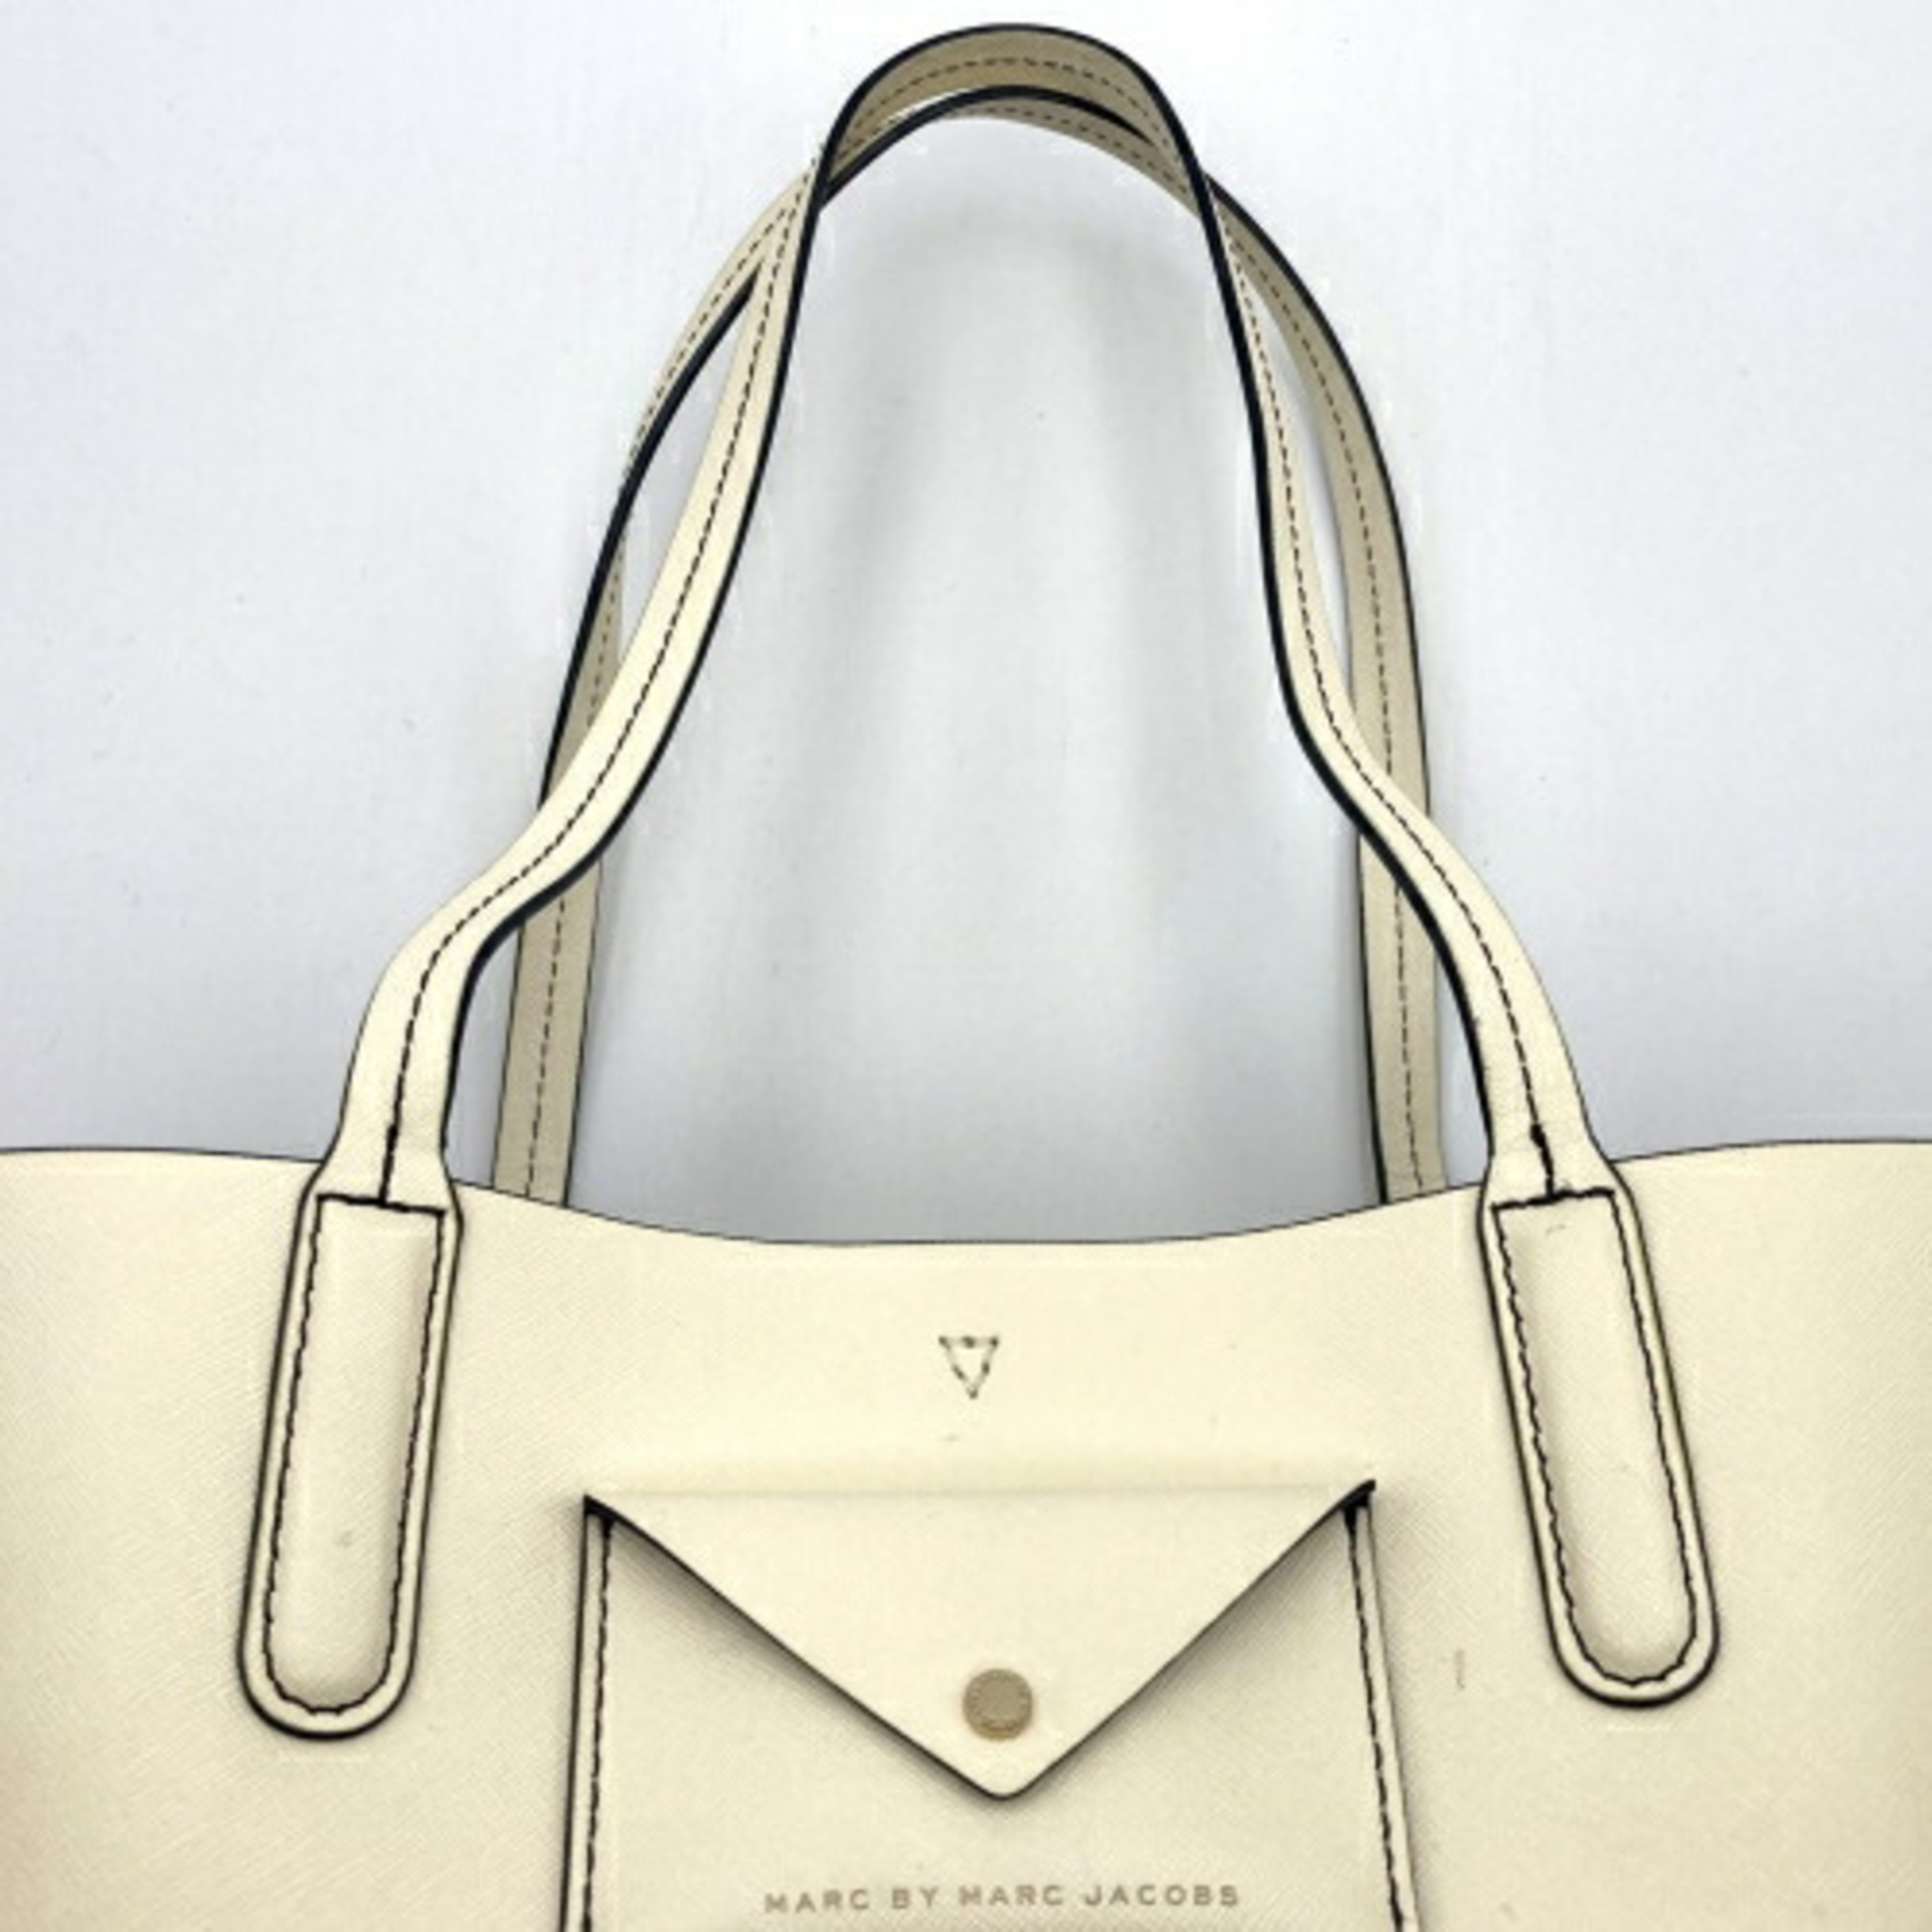 Marc by Marc Jacobs MARC BY JACOBS Tote Bag Handbag Medium Pouch White Leather IT37WXYARTFK